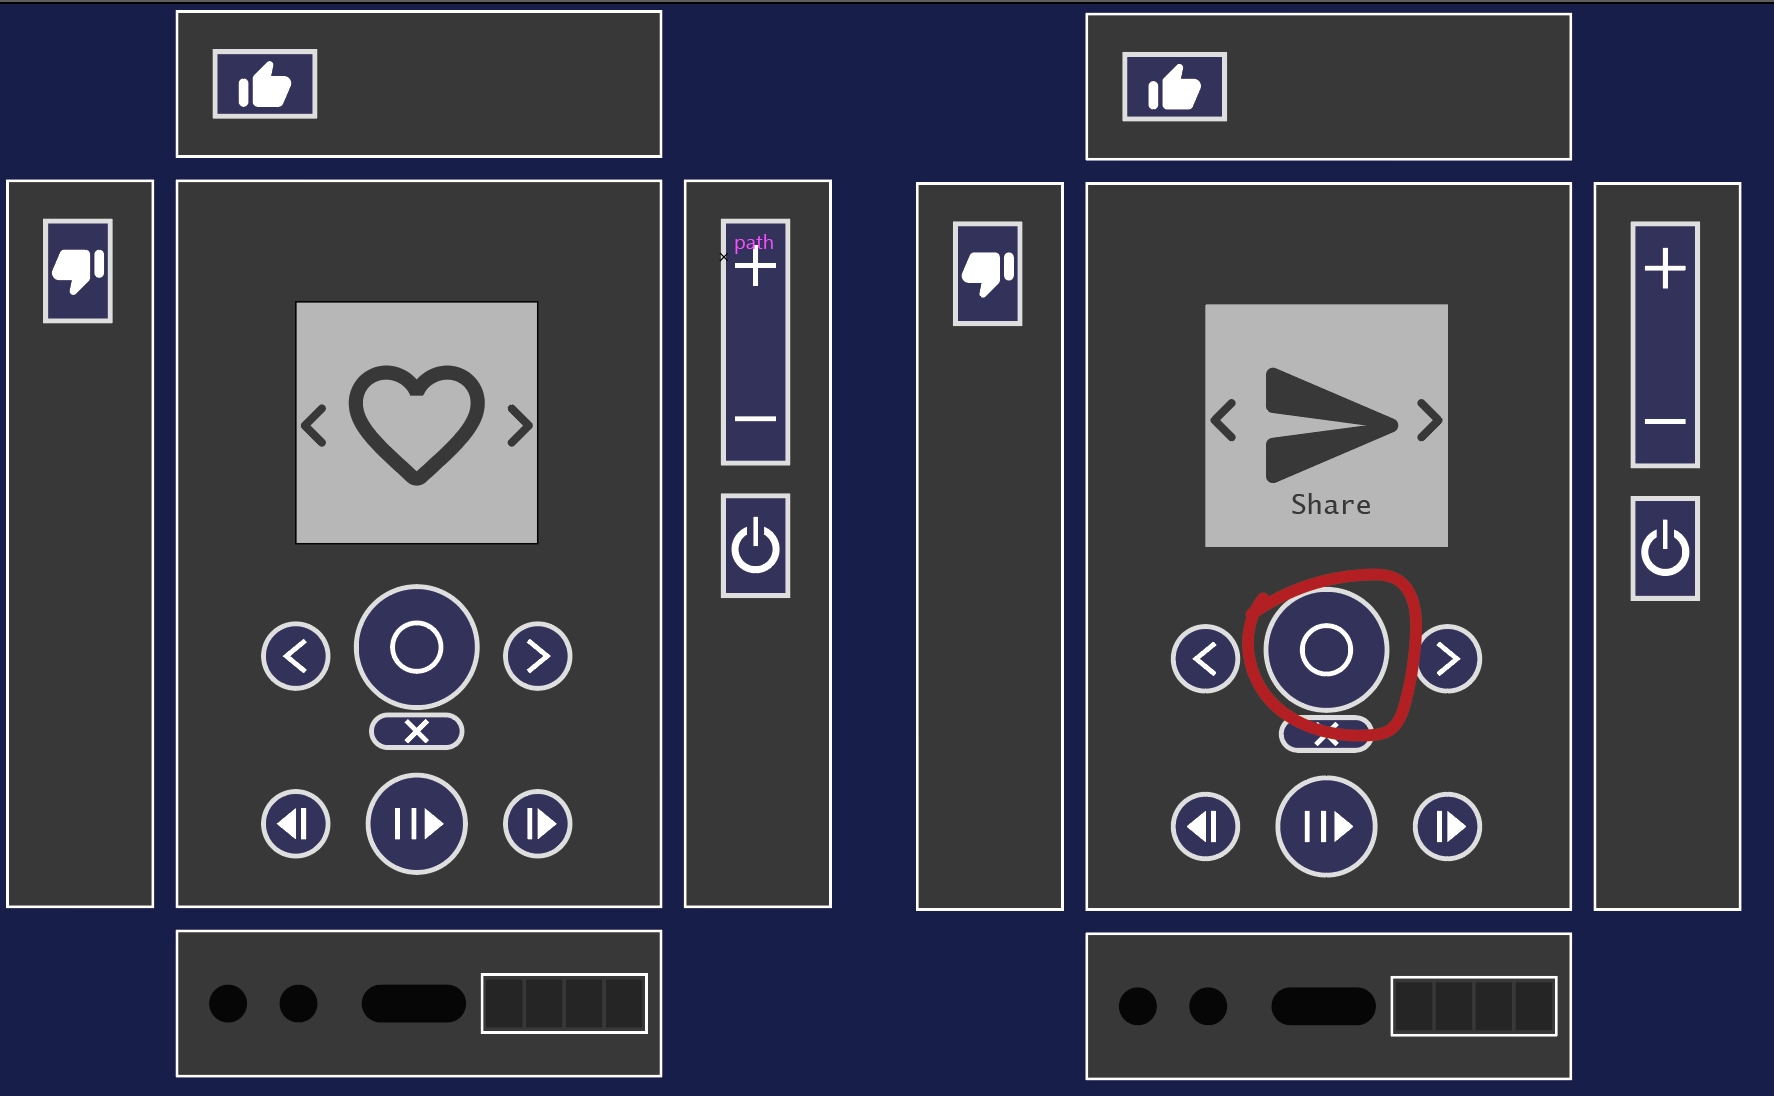 one device shows a persona symbol while the other shows a share icon.